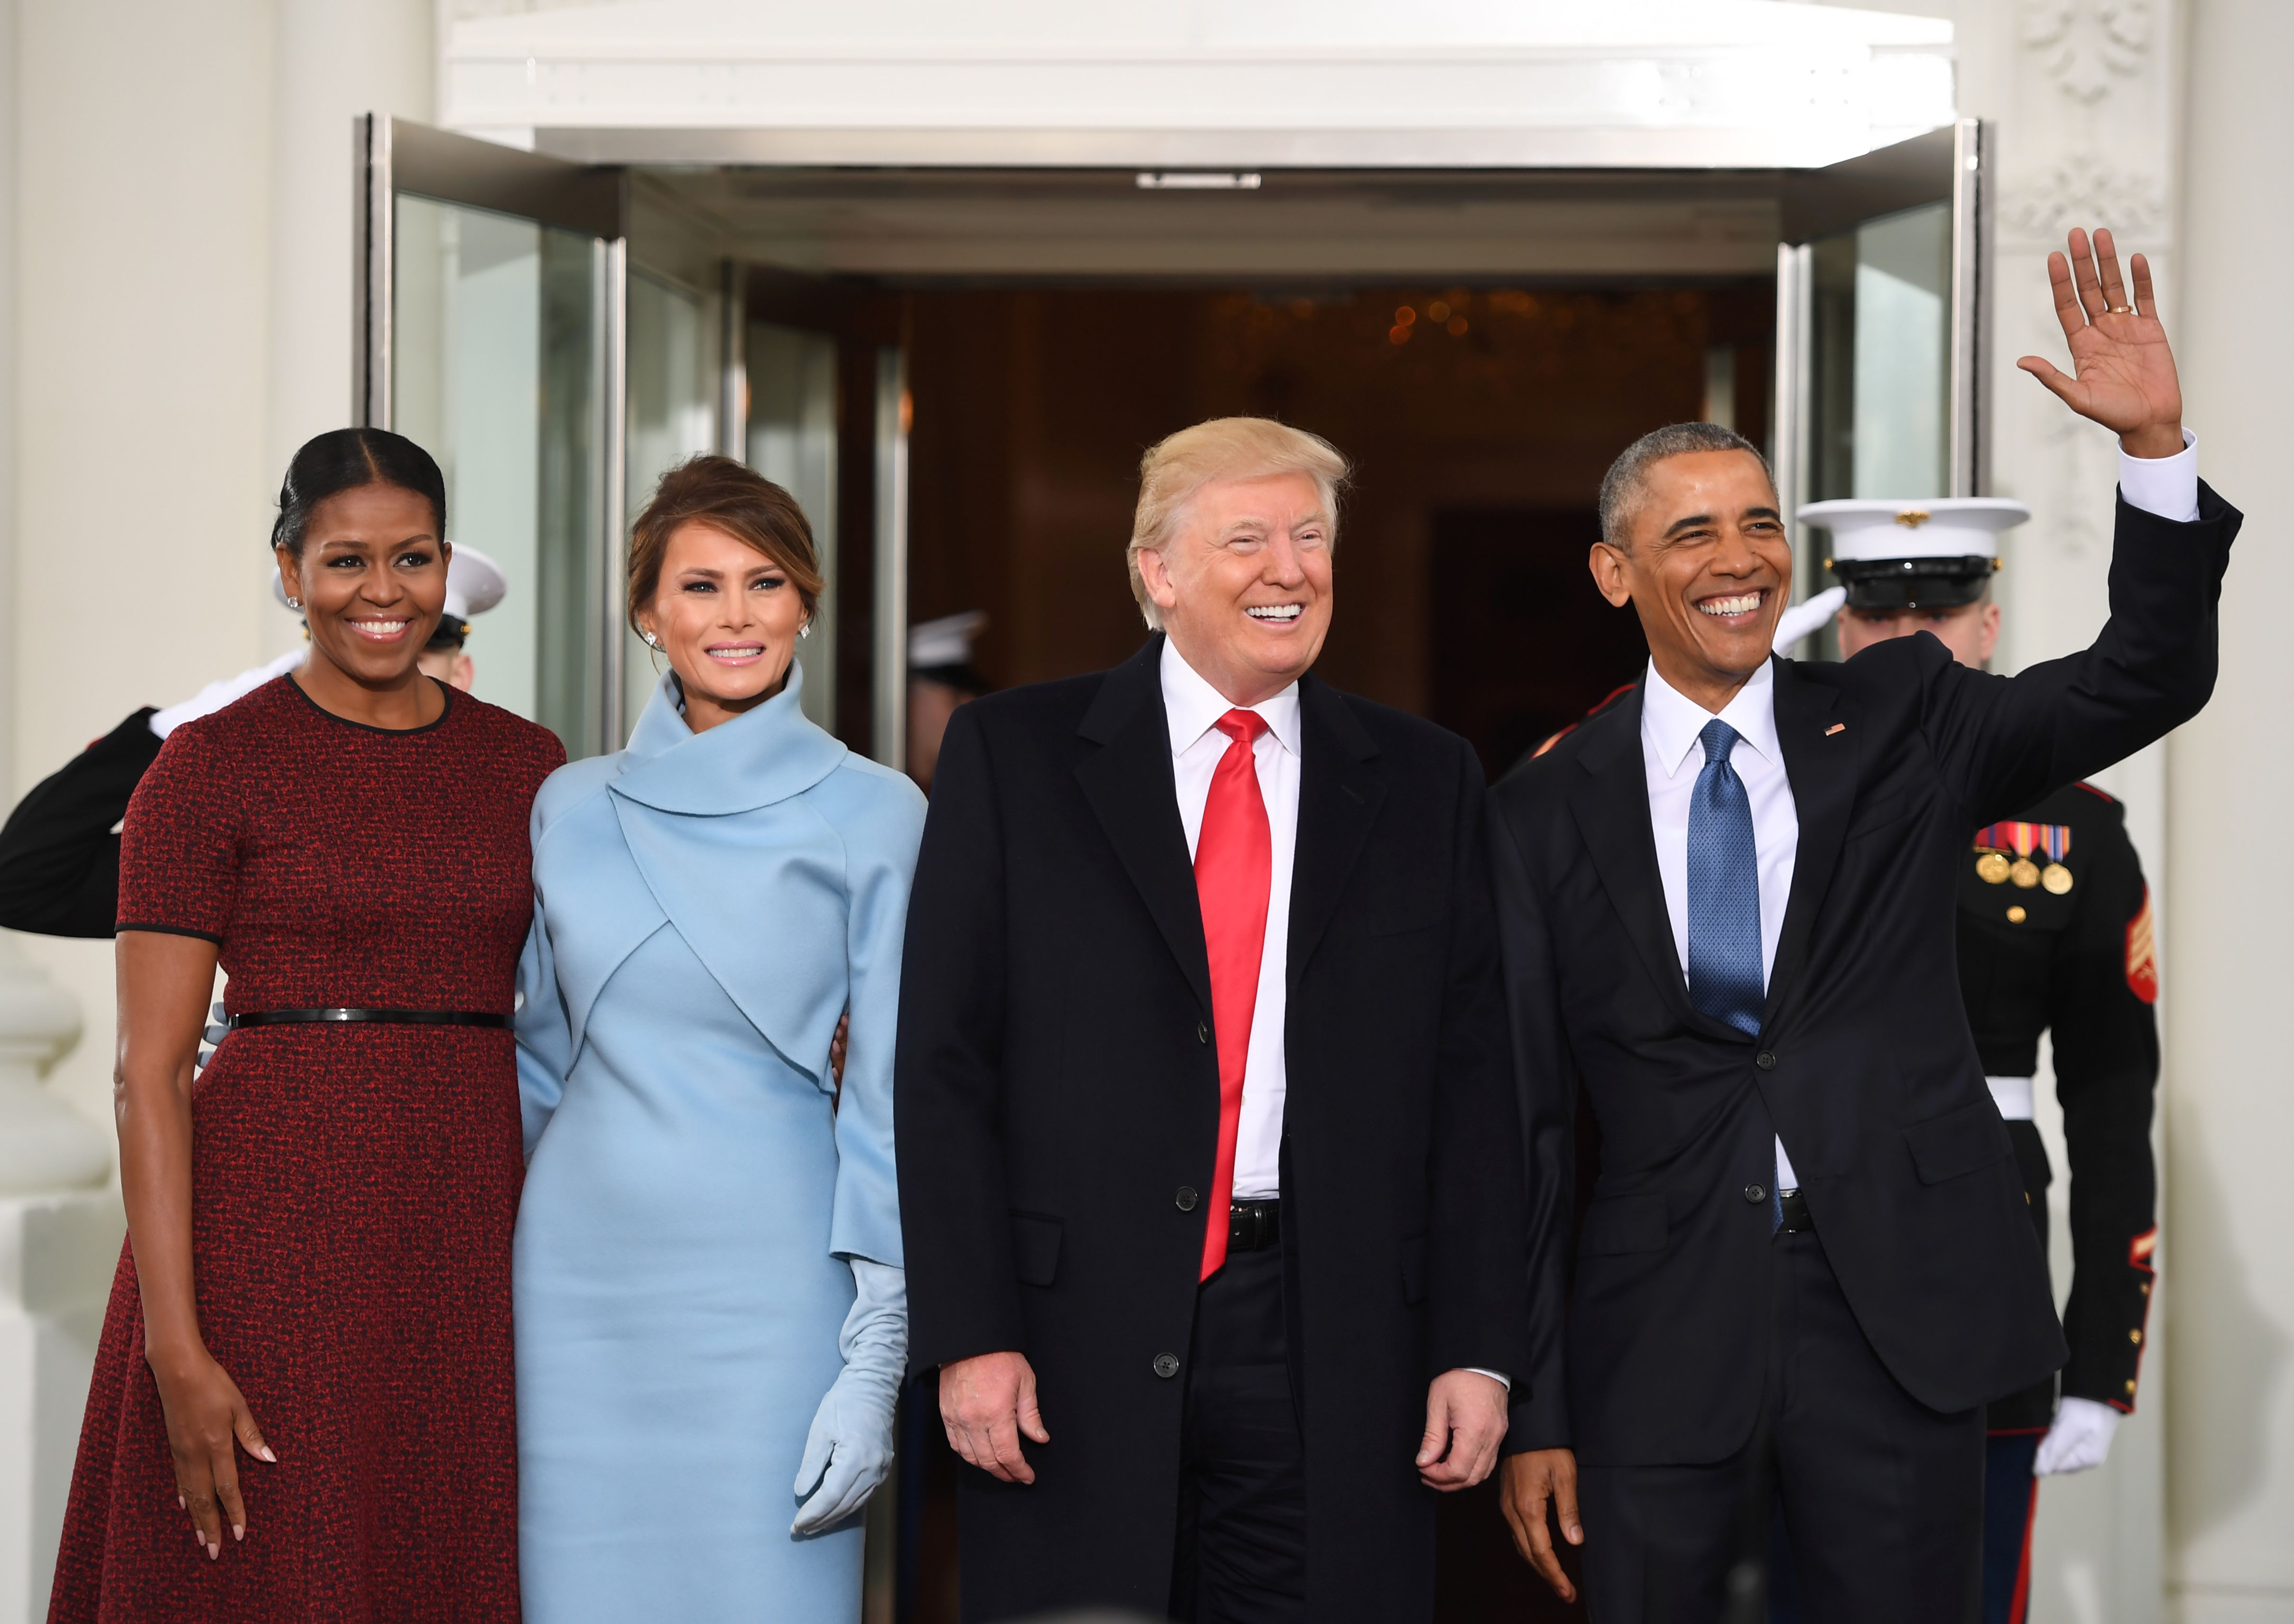 US President Barack Obama(R) and First Lady Michelle Obama(L) welcome Preisdent-elect Donald Trump(2nd-R) and his wife Melania to the White House in Washington, DC January 20, 2017.  / AFP PHOTO / JIM WATSON